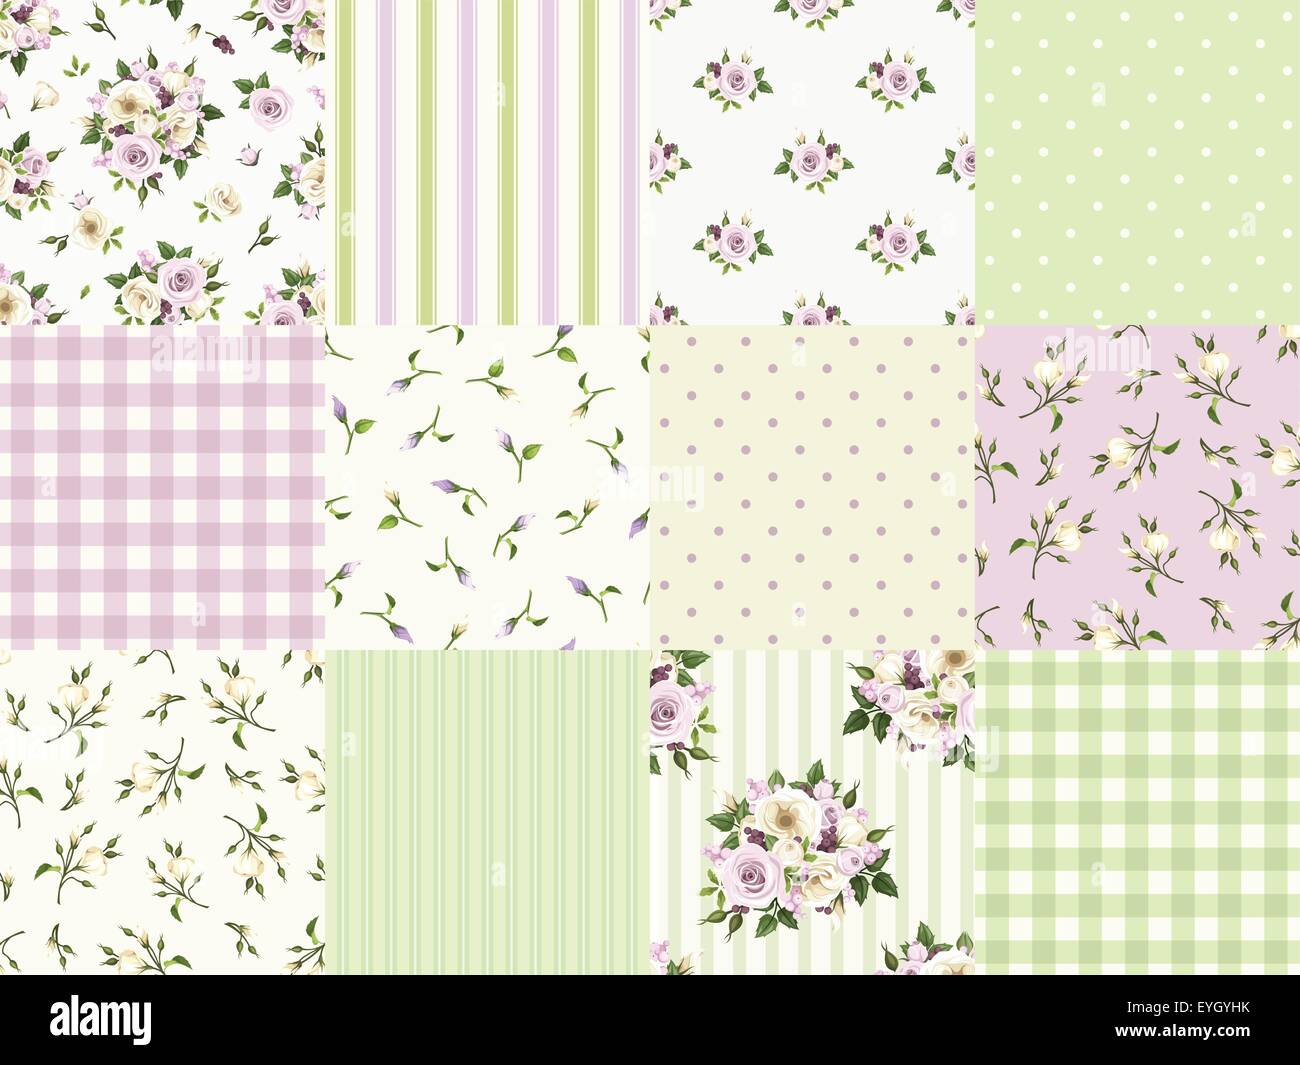 Set of seamless floral and geometric patterns for scrapbooking. Vector illustration. Stock Vector